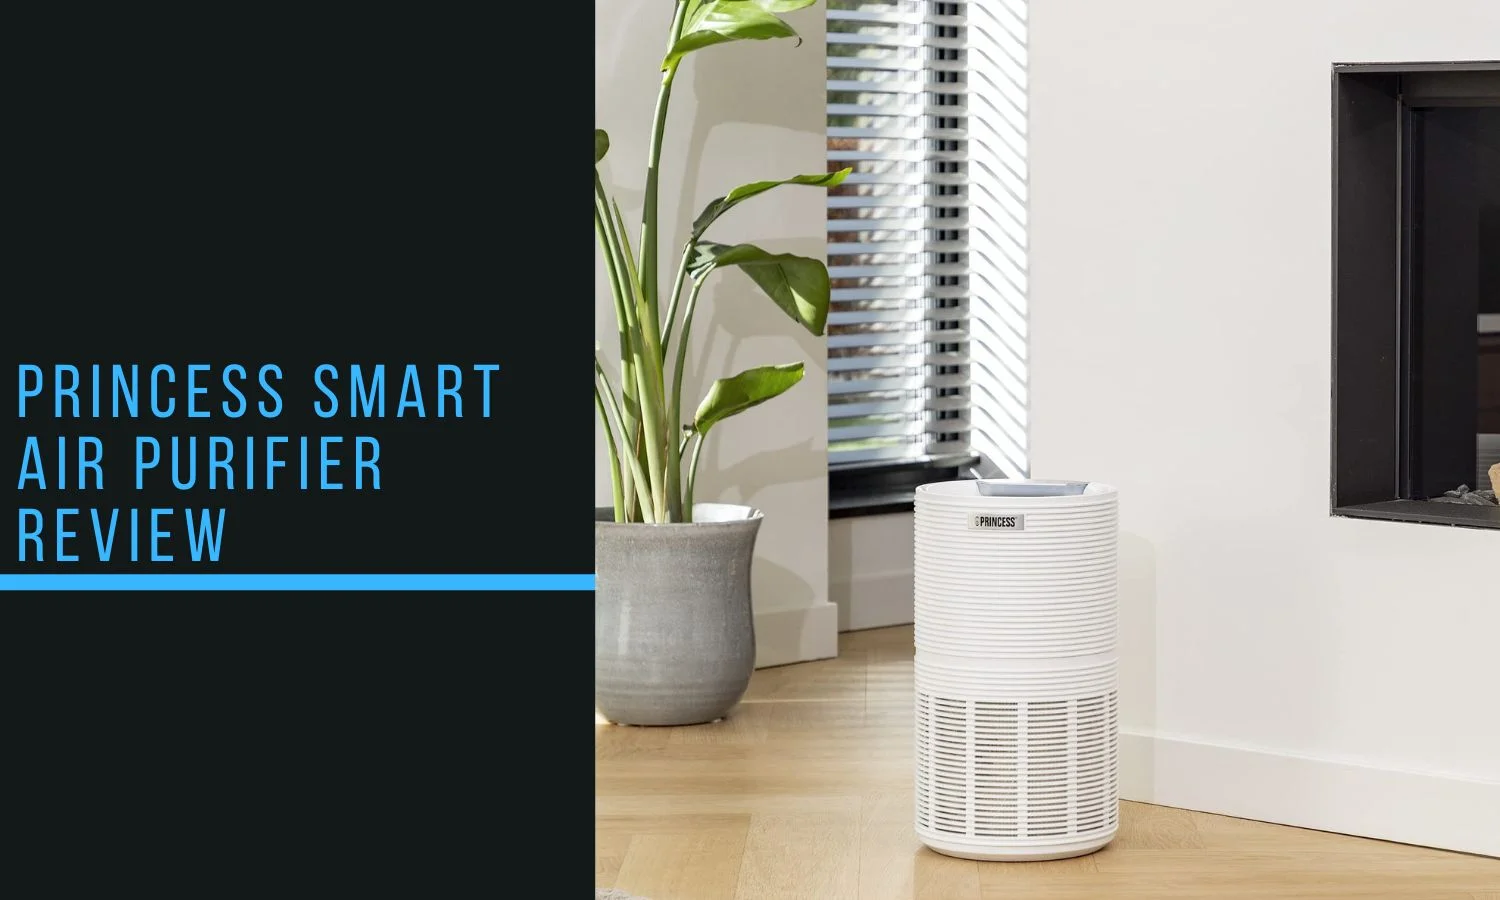 Princess Smart Air Purifier Review – An affordable mid-sized air purifier with a CADR of 280 m³/h